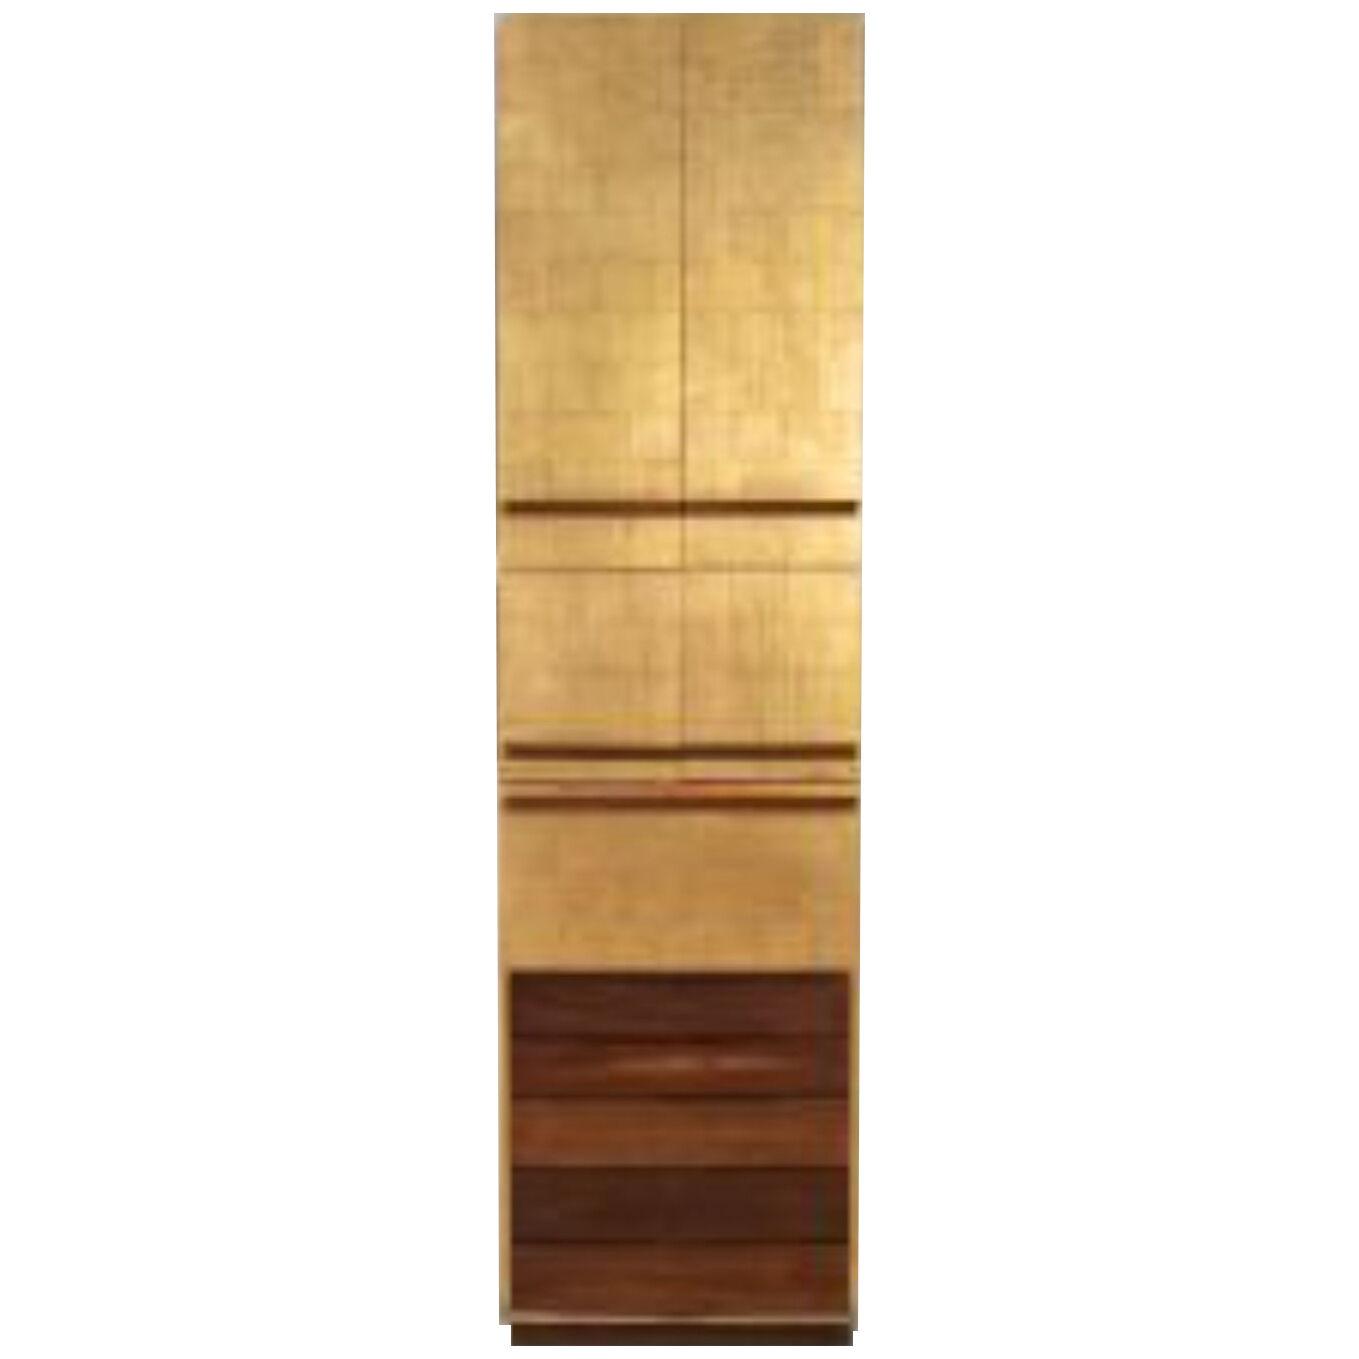 Paul Evans and Phillip Lloyd Powell Gold Leaf and Walnut Studio Cabinet 1963